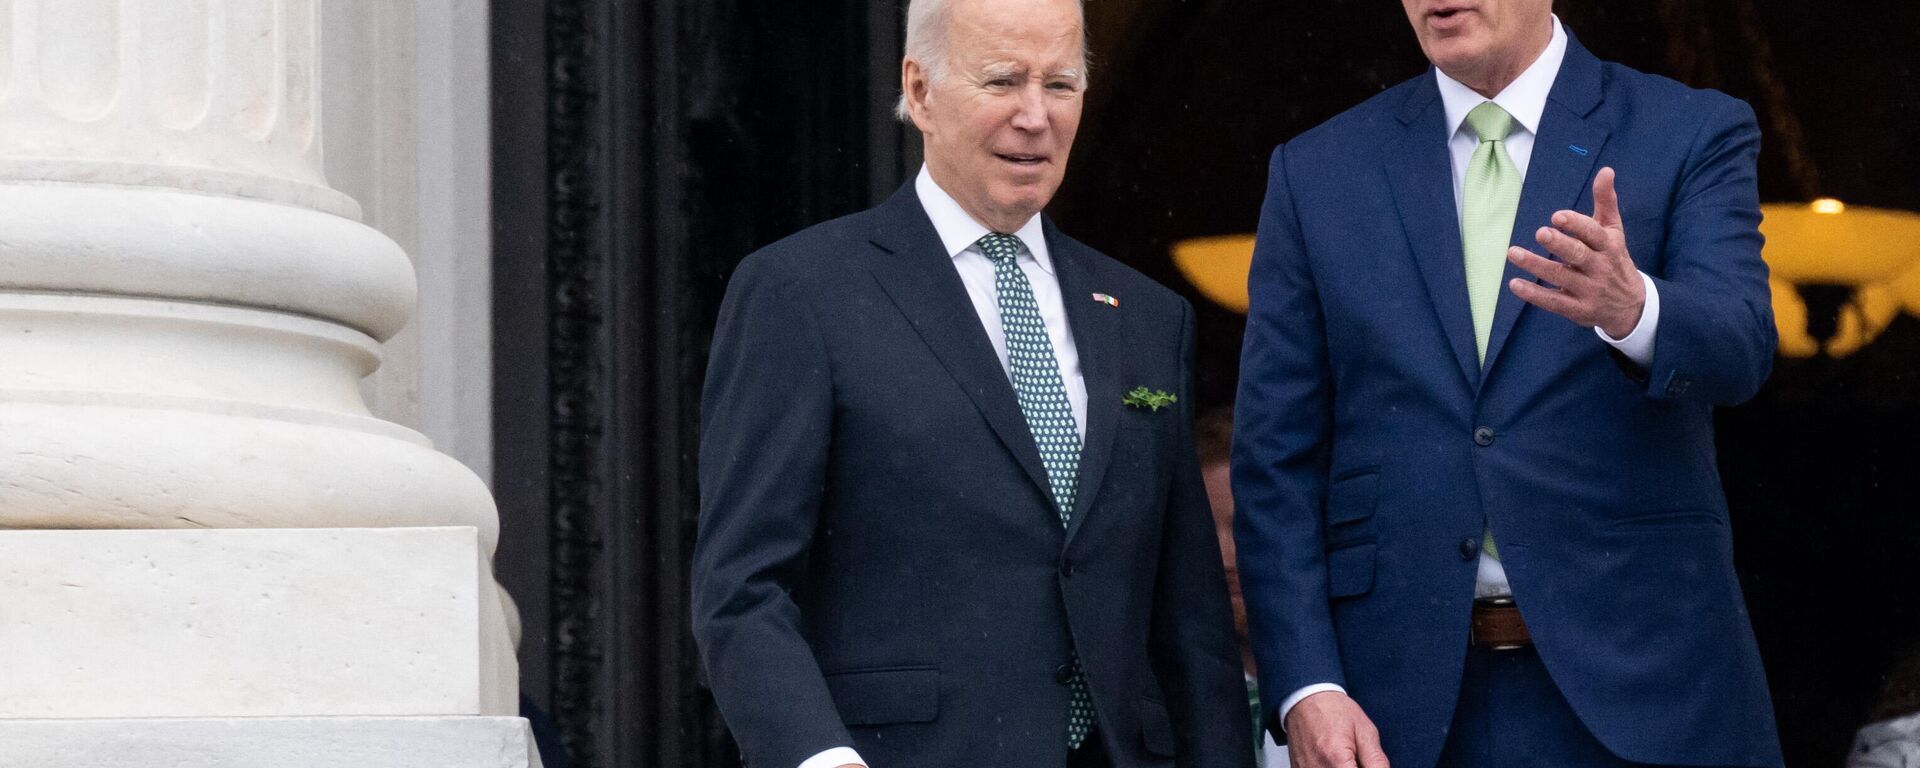 US President Joe Biden, accompanied by Speaker of the House Kevin McCarthy, Republican of California, departs after the annual Friends of Ireland luncheon on St. Patrick's Day at the US Capitol in Washington, DC, on March 17, 2023 - Sputnik International, 1920, 19.05.2023